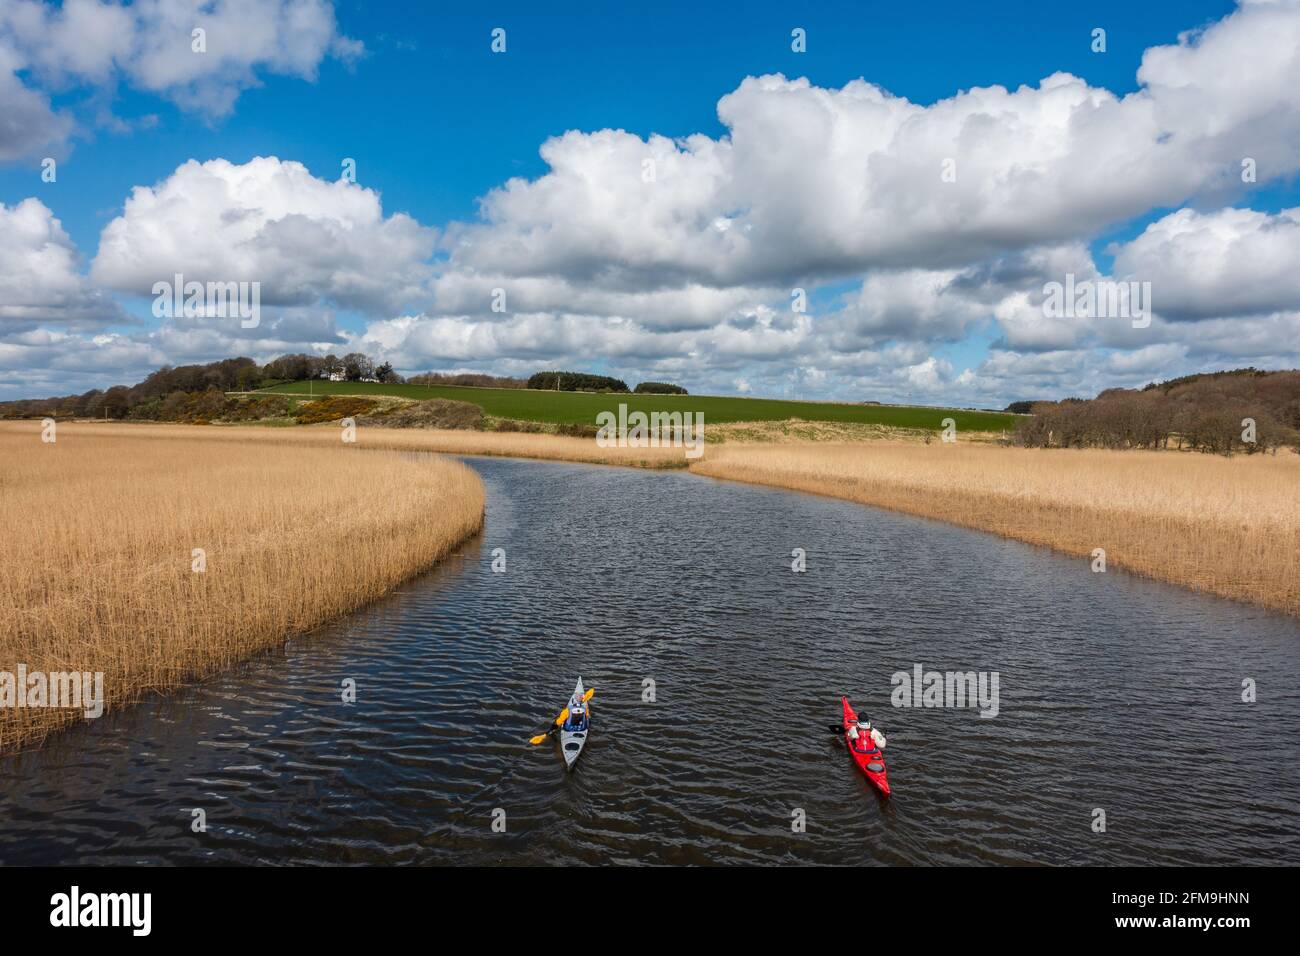 Kayakers on the River Ythan at Logie Buchan, Aberdeenshire, Scotland Stock Photo